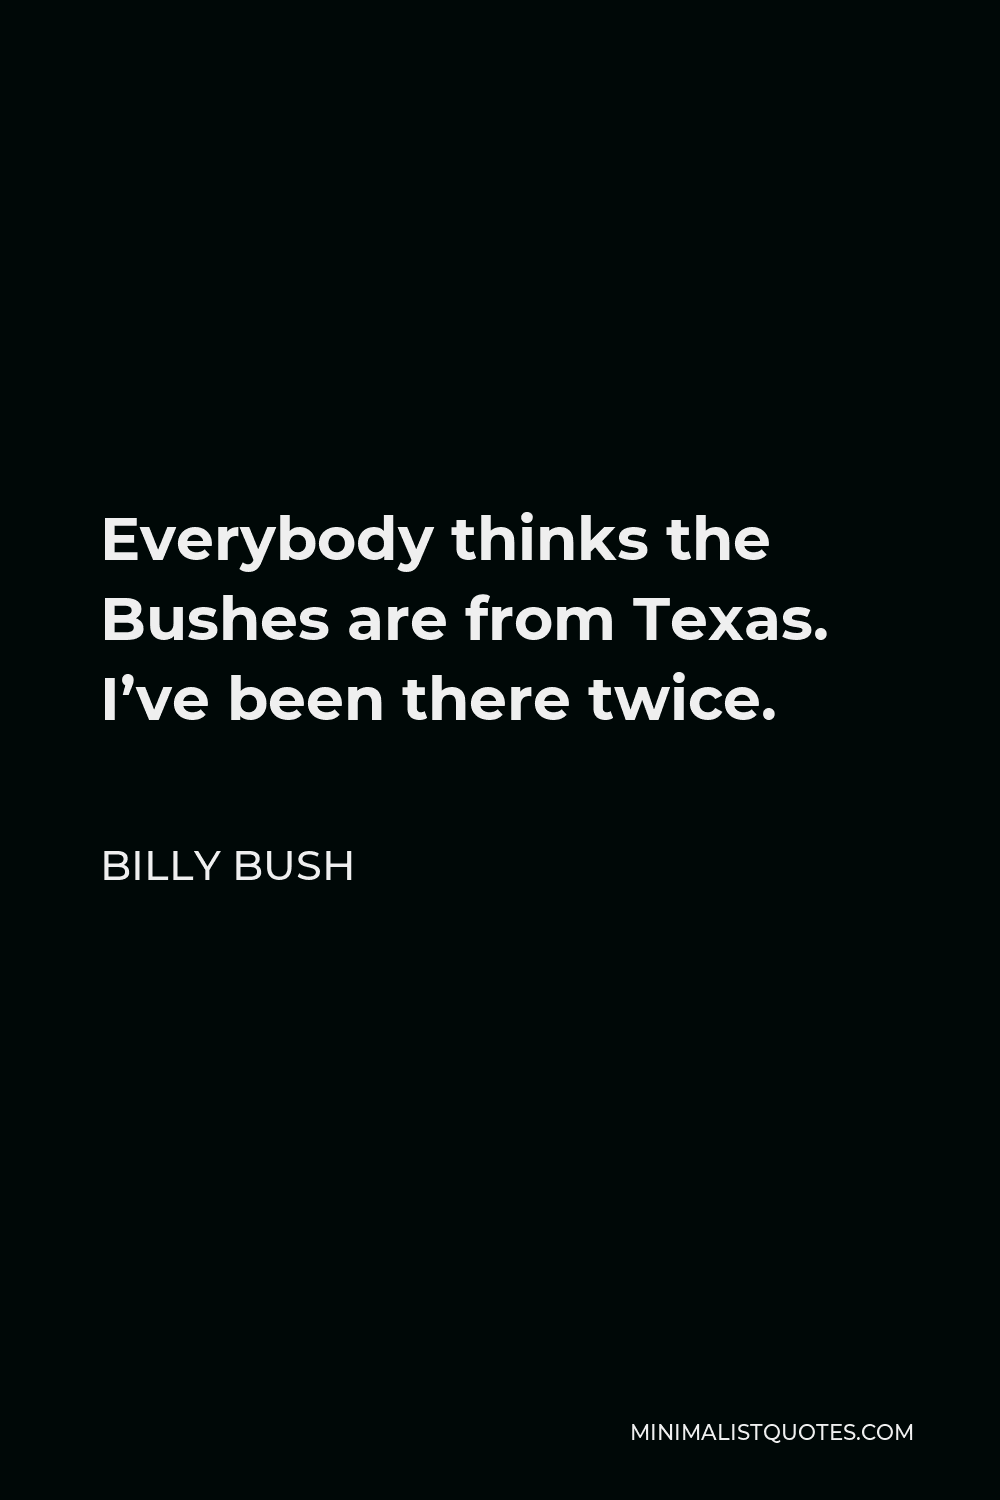 Billy Bush Quote - Everybody thinks the Bushes are from Texas. I’ve been there twice.